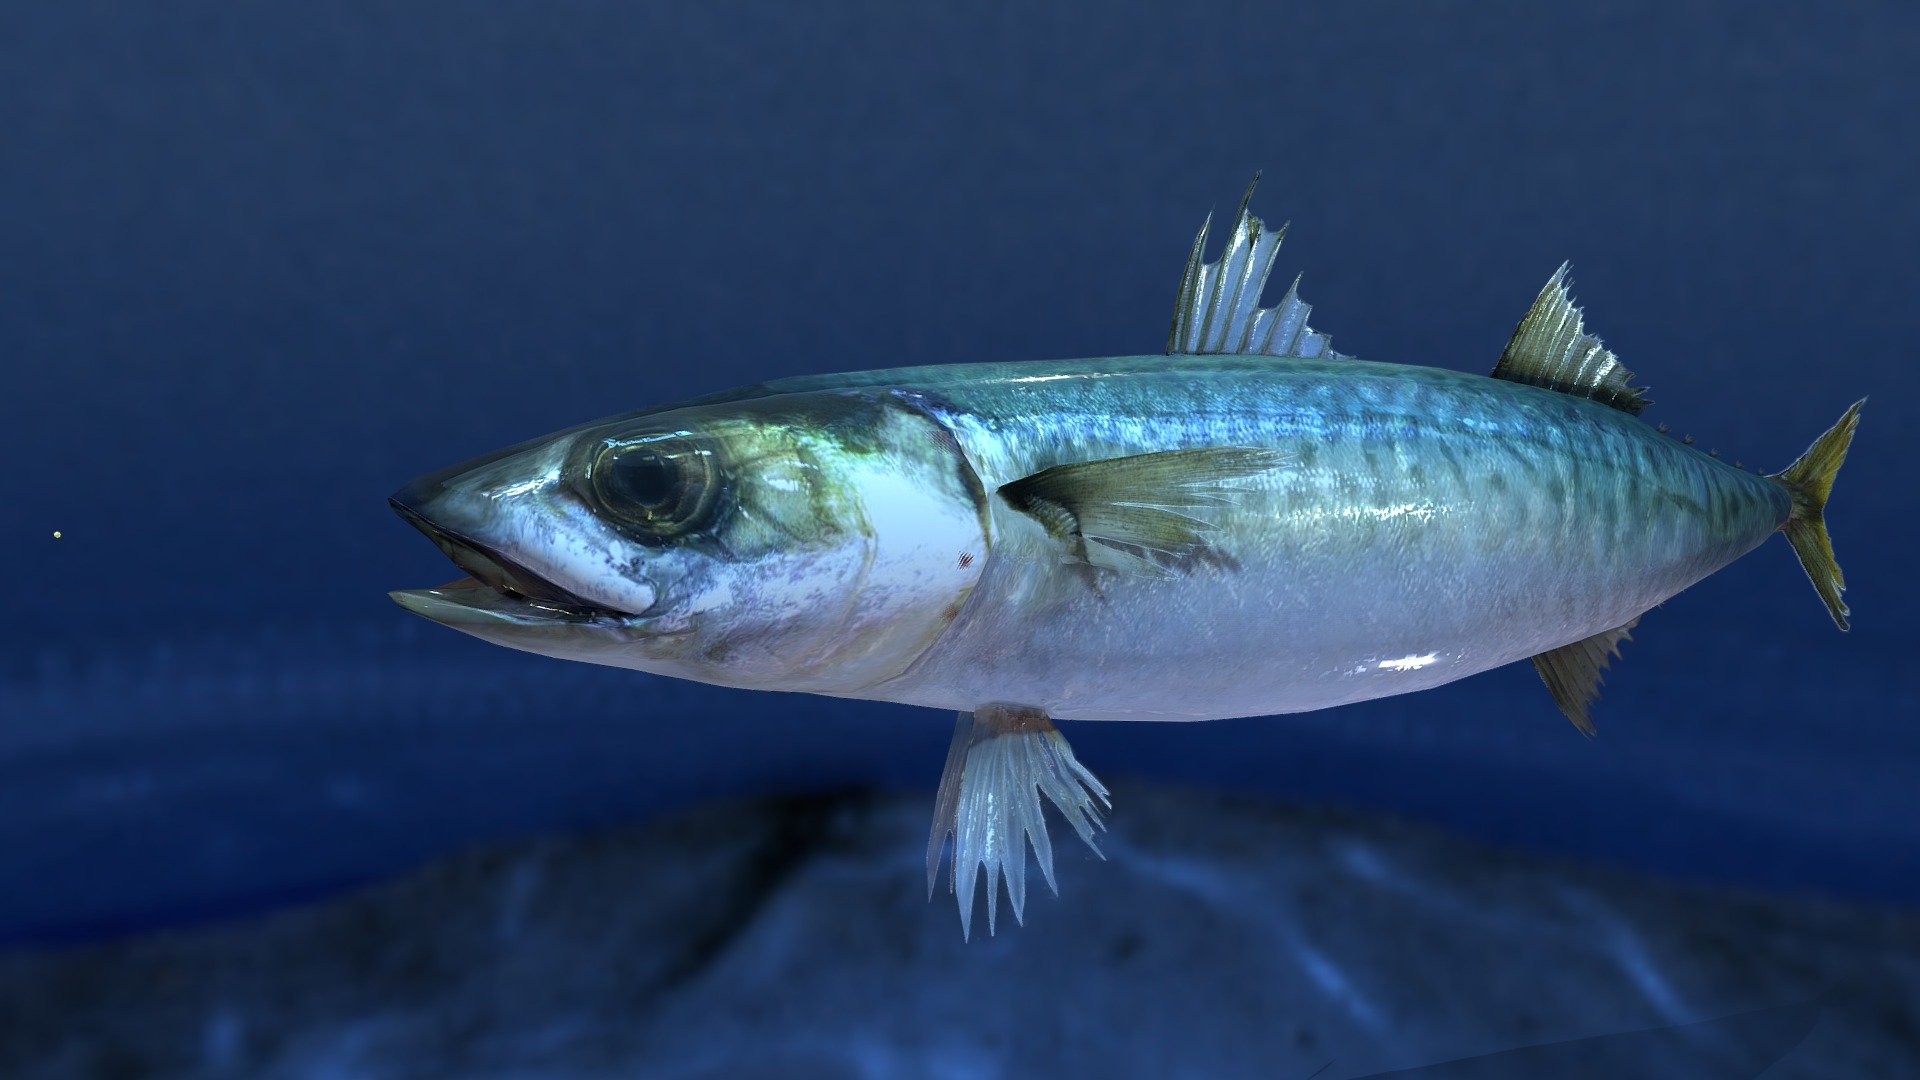 I'm producing aiming at realistic fish. It was made in Blender.
The resolution is lowered a little, and it's being indicated.

There are a blender file and a fbx file for Unity.
fbx for Unity makes the fin tension of both sides. WebGL used actually in unity Please refer to this website.
https://turidata.blog.fc2.com/blog-entry-28.html

When needing more detailed information about fish, please refer to osakana watch. It's my site  (language: Japanese).

It's possible to include a material of 4096 x 4096 and use that in version more than 1.0.
When there is your request, I'll sell it by 20-30$. (file:Blender,gltf,fbx,obj,etc&hellip;)

This 3D is v1.5

リアルな魚を目指して制作しています。Blenderで作成しました。
解像度を下げて表示しています。

Unity用ではblenderファイル、fbxファイルがあります。
Unity用のfbxはヒレなどを両面張りにしています。unityで実際に使用されているWebGLはこちらをご参照ください。
https://turidata.blog.fc2.com/blog-entry-28.html

さらに魚についての詳しい情報が必要であれば、osakana watch運営サイトをご参照ください(言語:日本語)

ご要望があれば20～30$で販売いたします。(file:Blender,gltf,fbx,obj,etc&hellip;)
v1.0以上では、4096×4096のマティリアルを含み、それを使うことができます。 - マサバ(Chub mackerel) - 3D model by tanigutisora (@osakanaWatch) 3d model